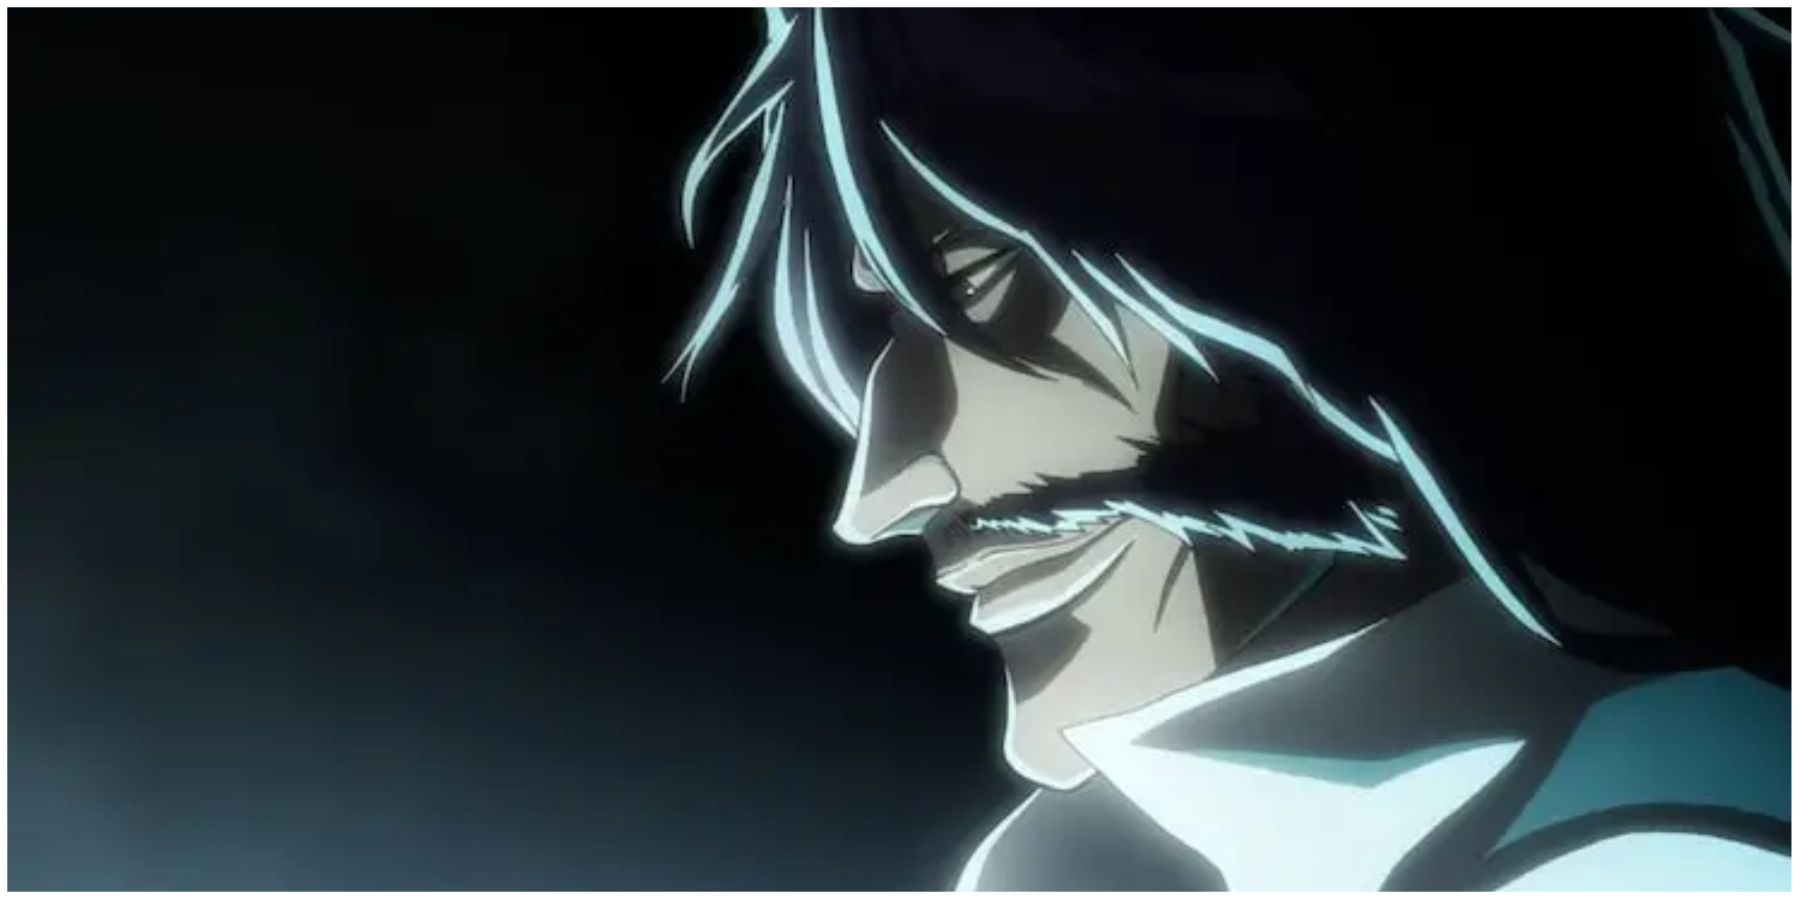 Yhwach Smiling Prior To The Invasion Of Bleach’s Soul Society